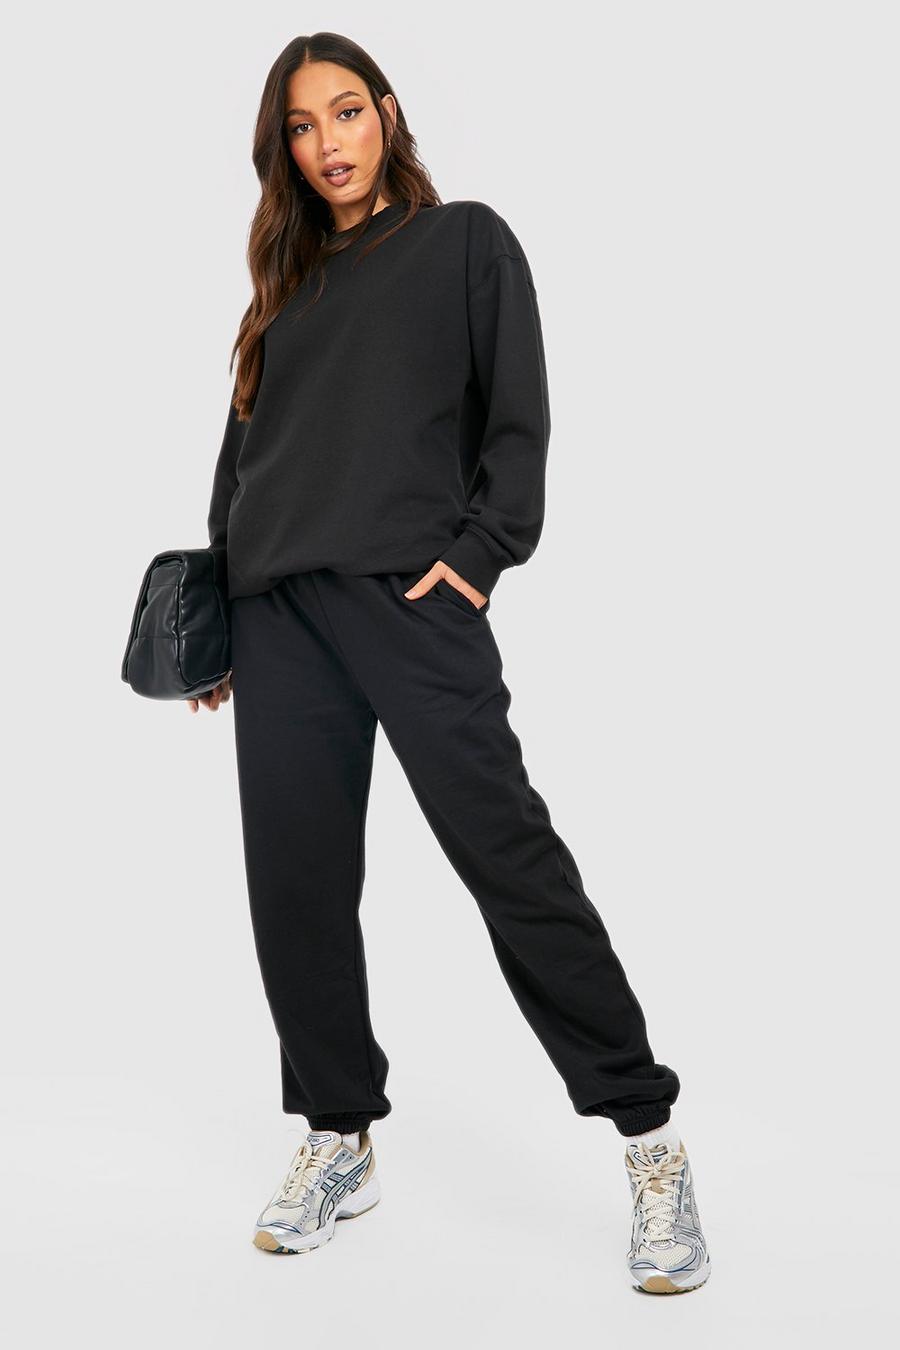 Twill Jogger Pants for Tall Women in Black